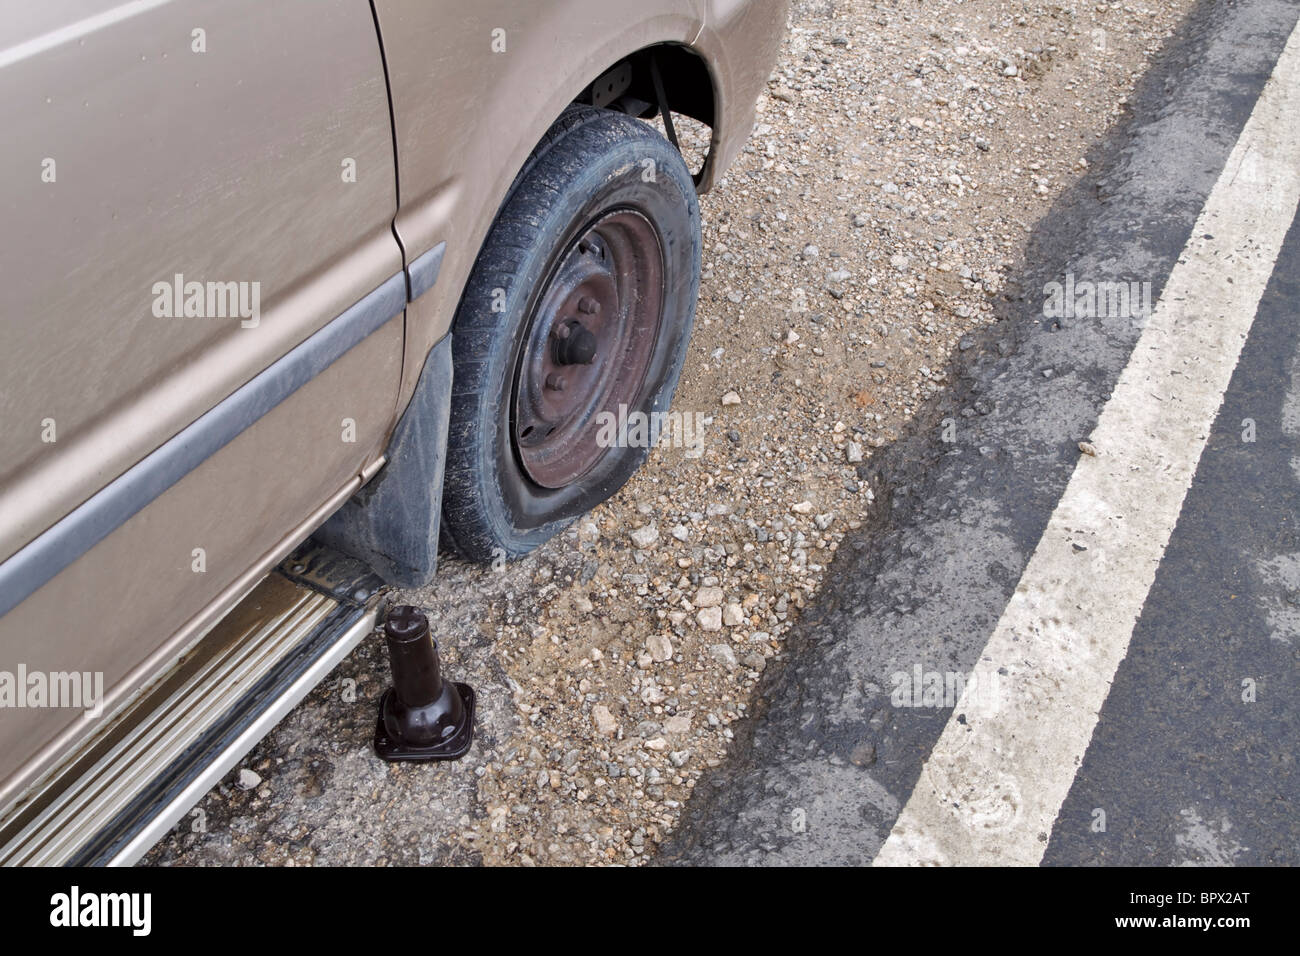 Flat tyre. Car with a flat tire pulled over by the side of the road on the soft shoulder. Stock Photo